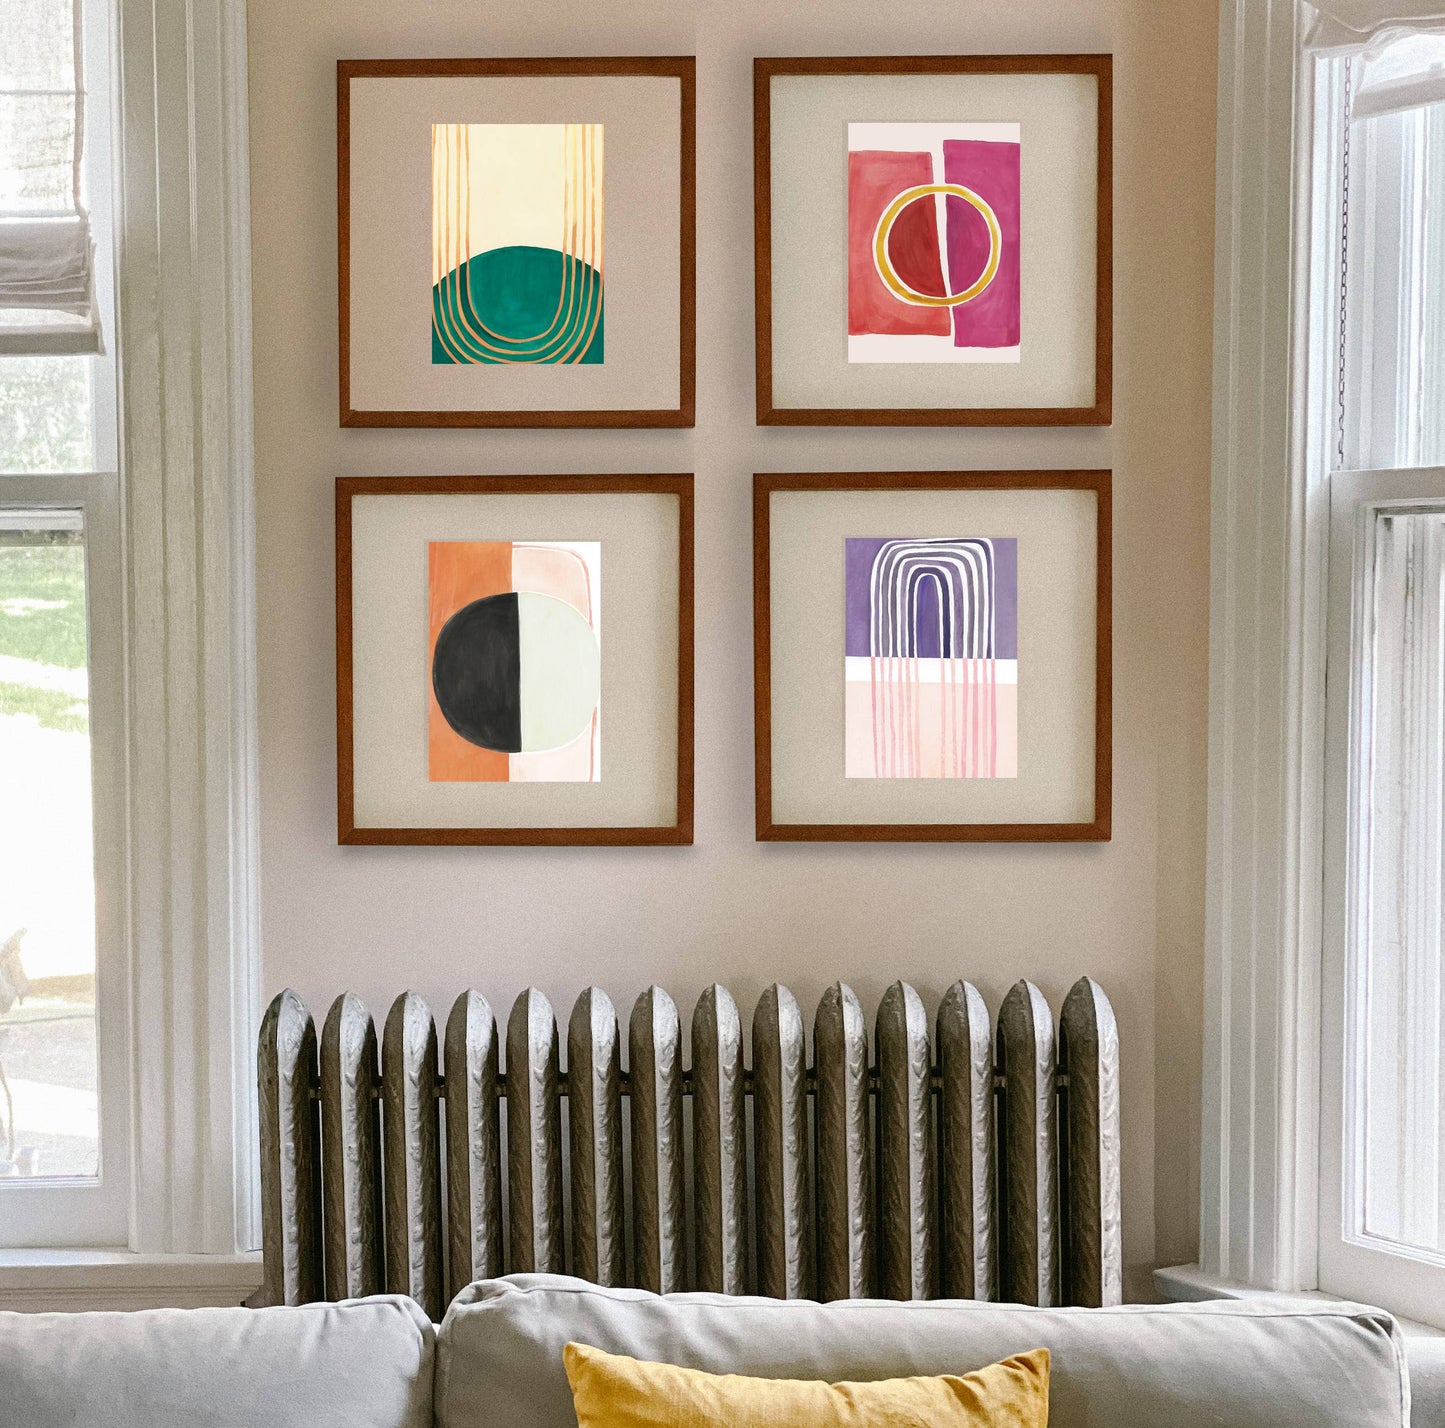 Colorful mid-century modern art prints that can be displayed as a set or individually.